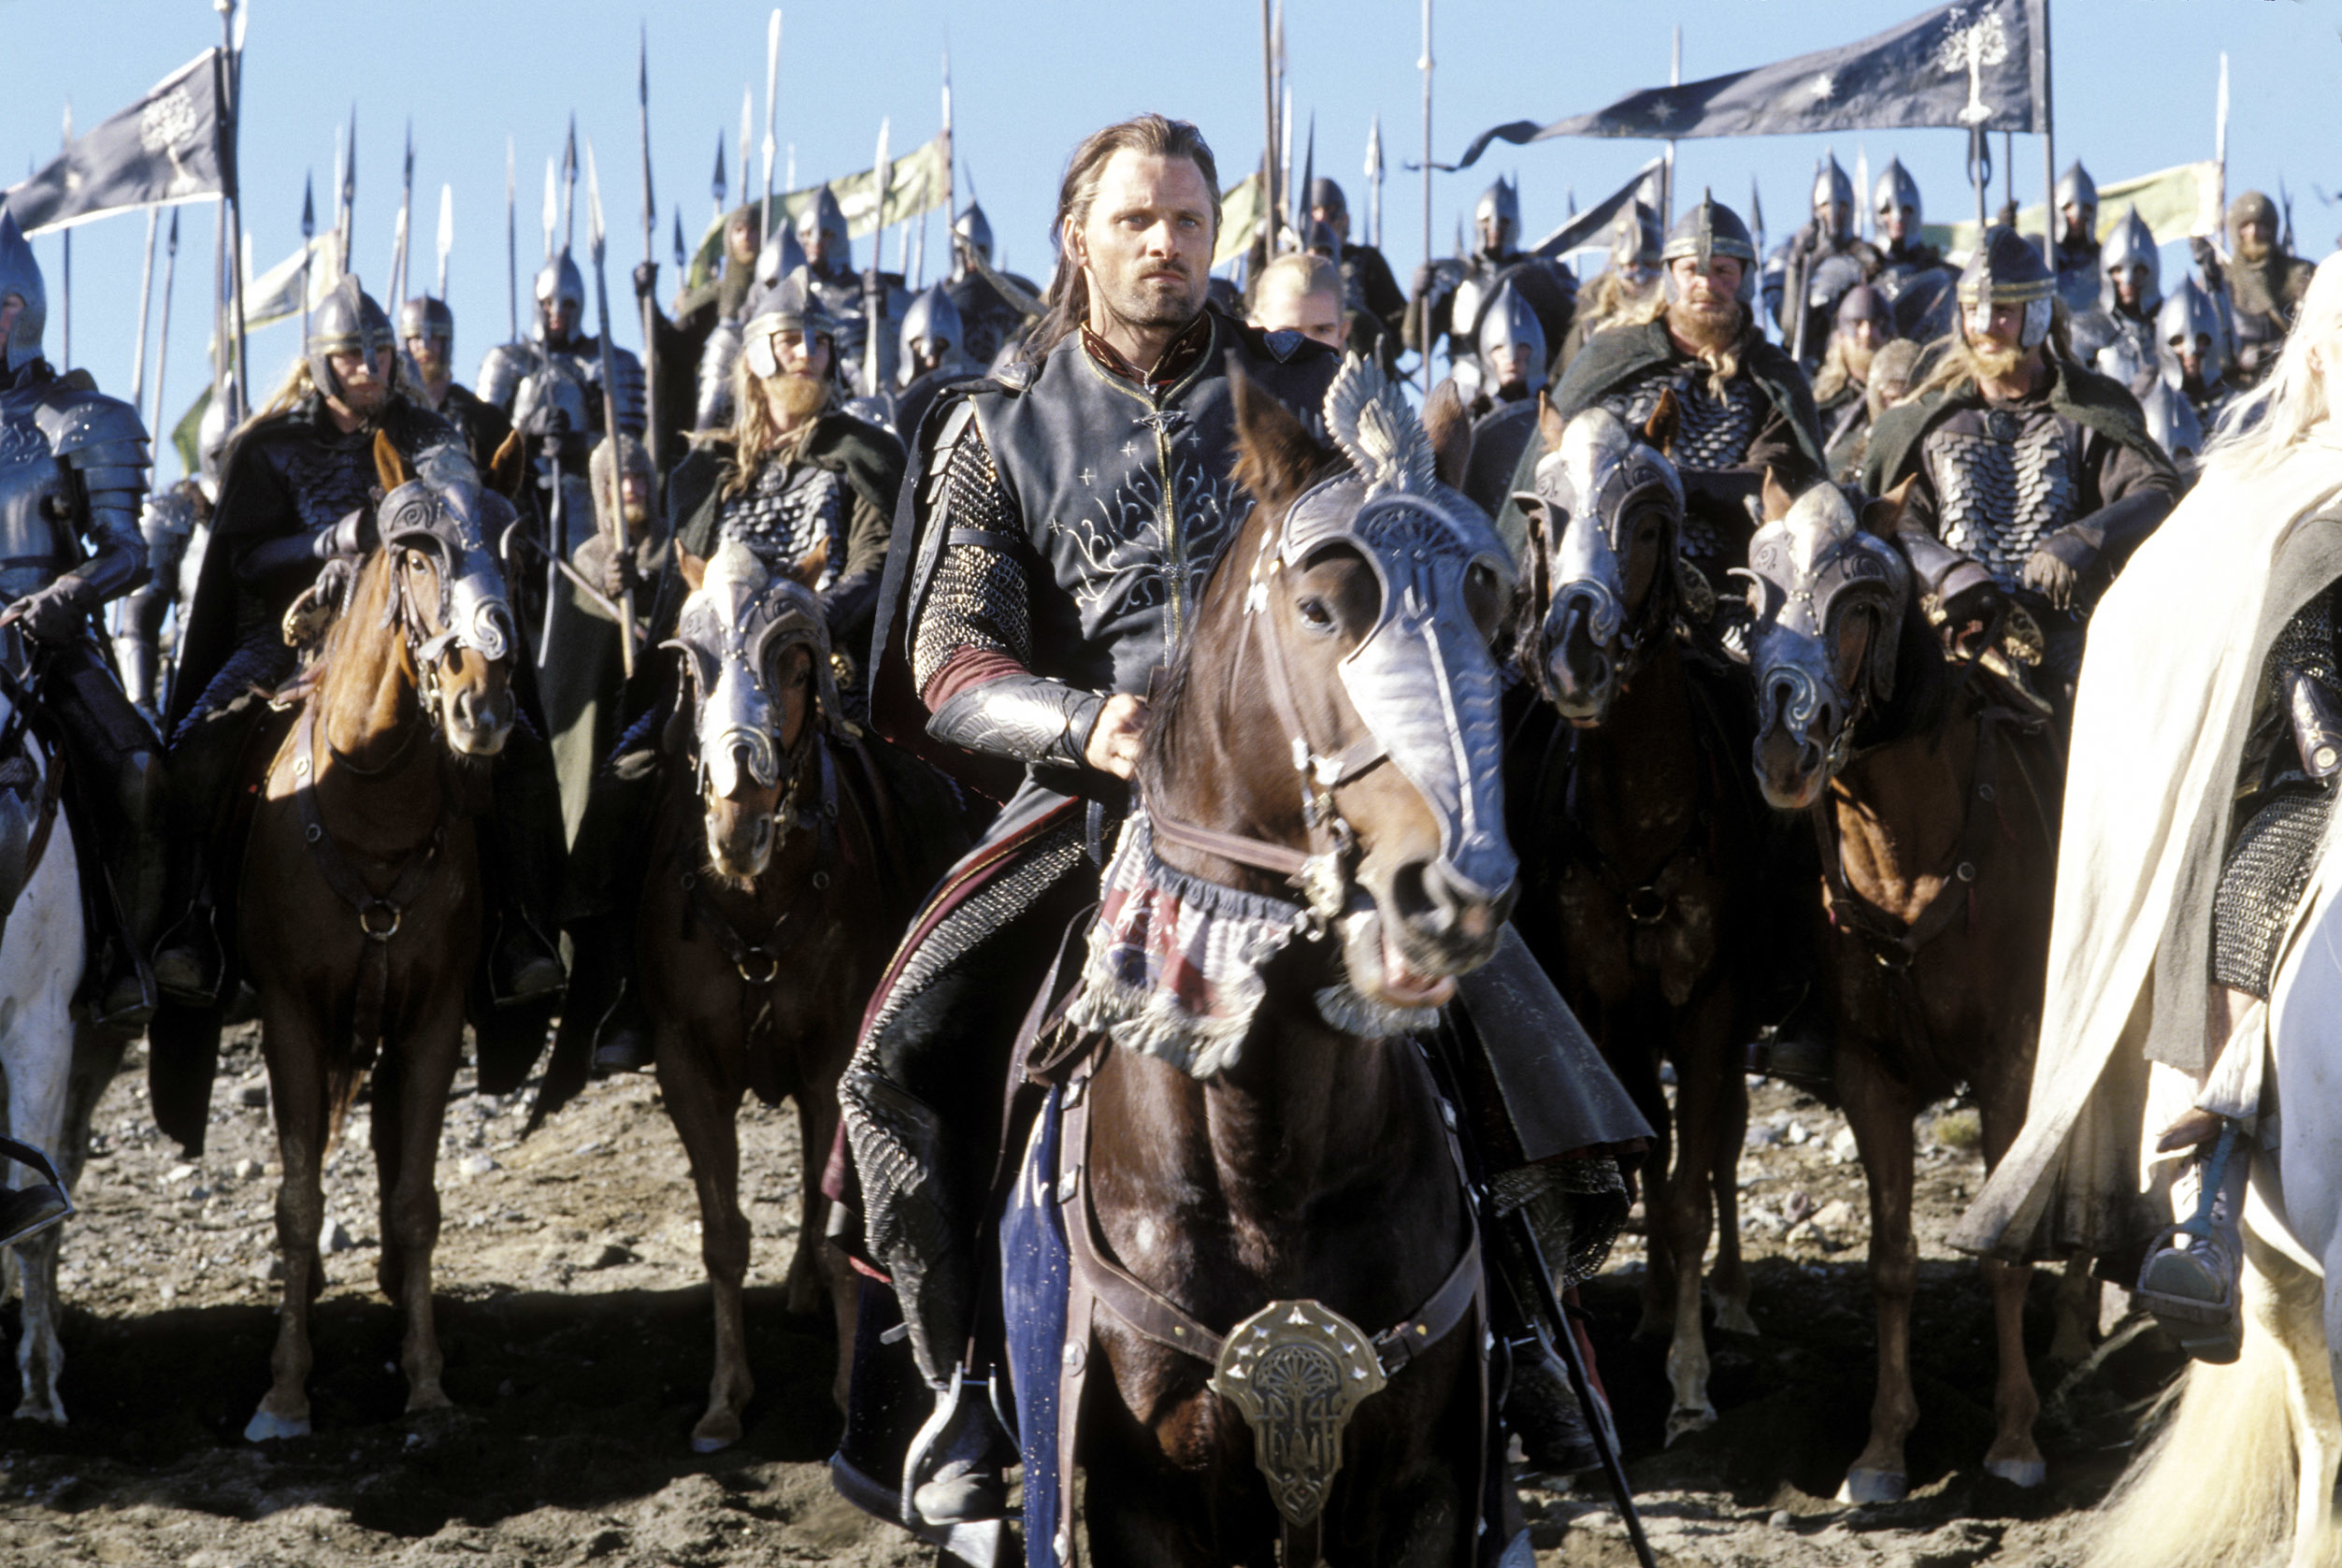 his character riding horseback with an army behind him